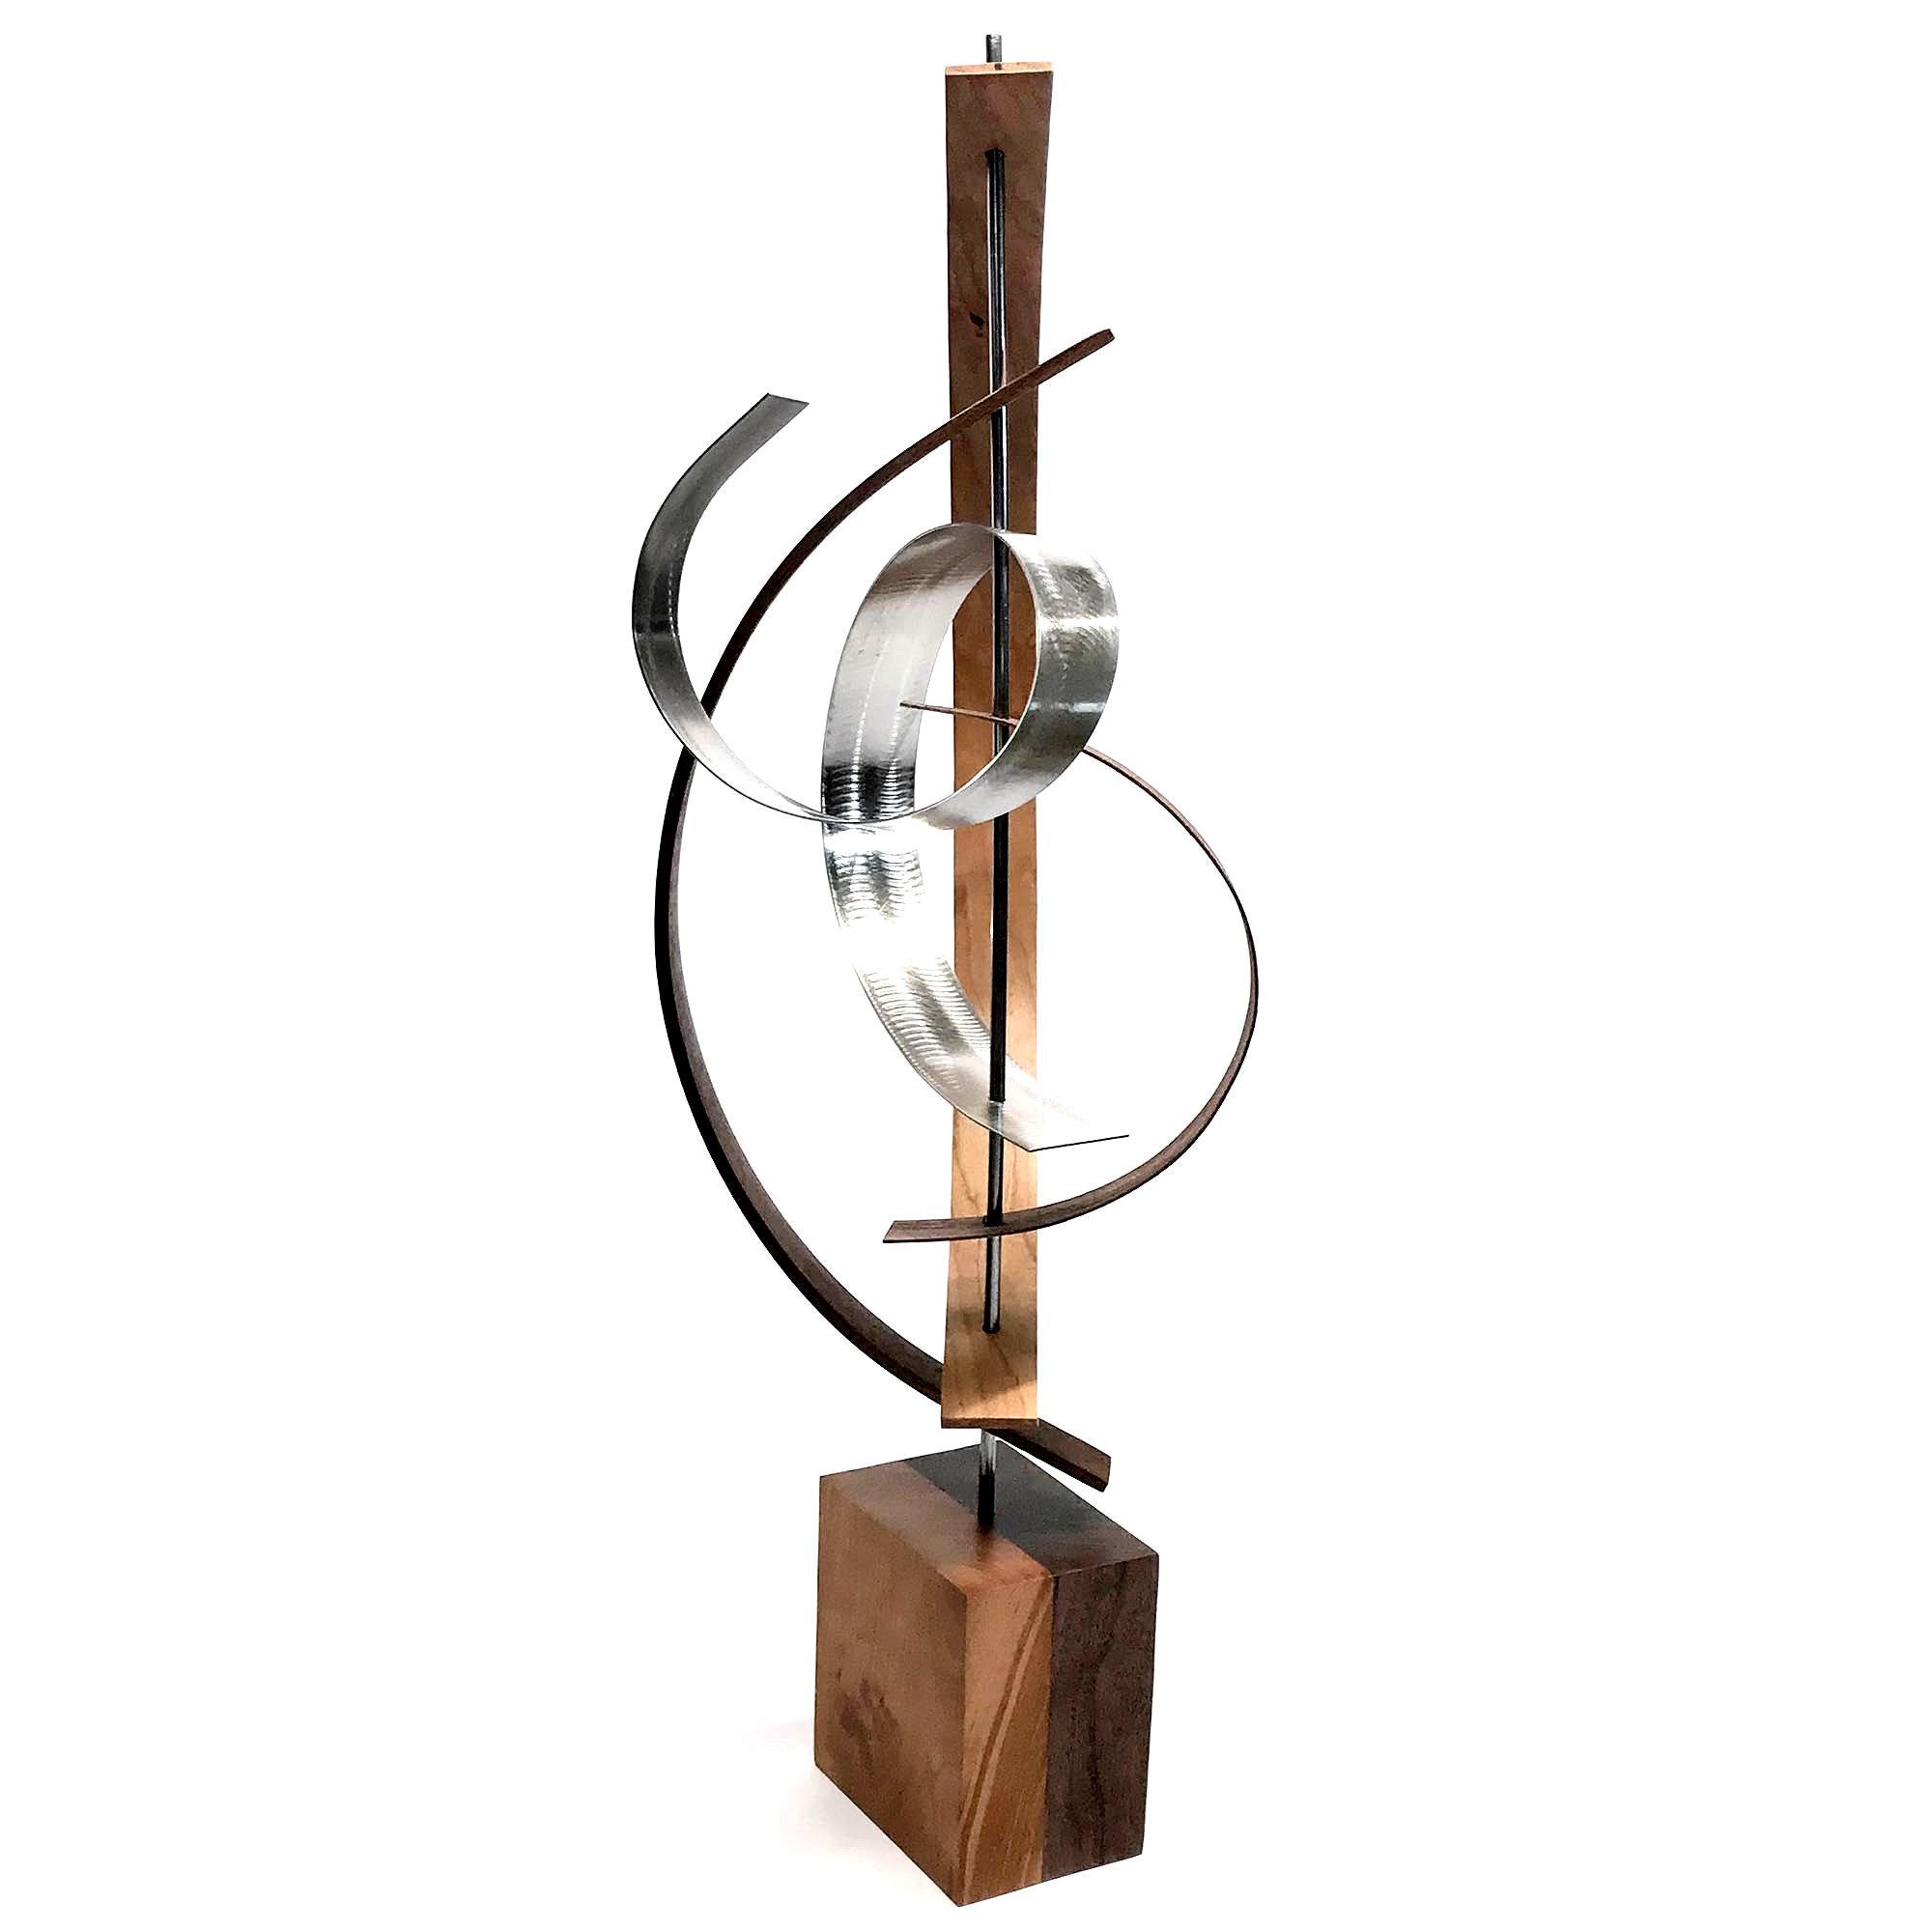 Mid-Century Modern Inspired,  Wood Sculpture, Contemporary Abstract, by Jeff L. 2